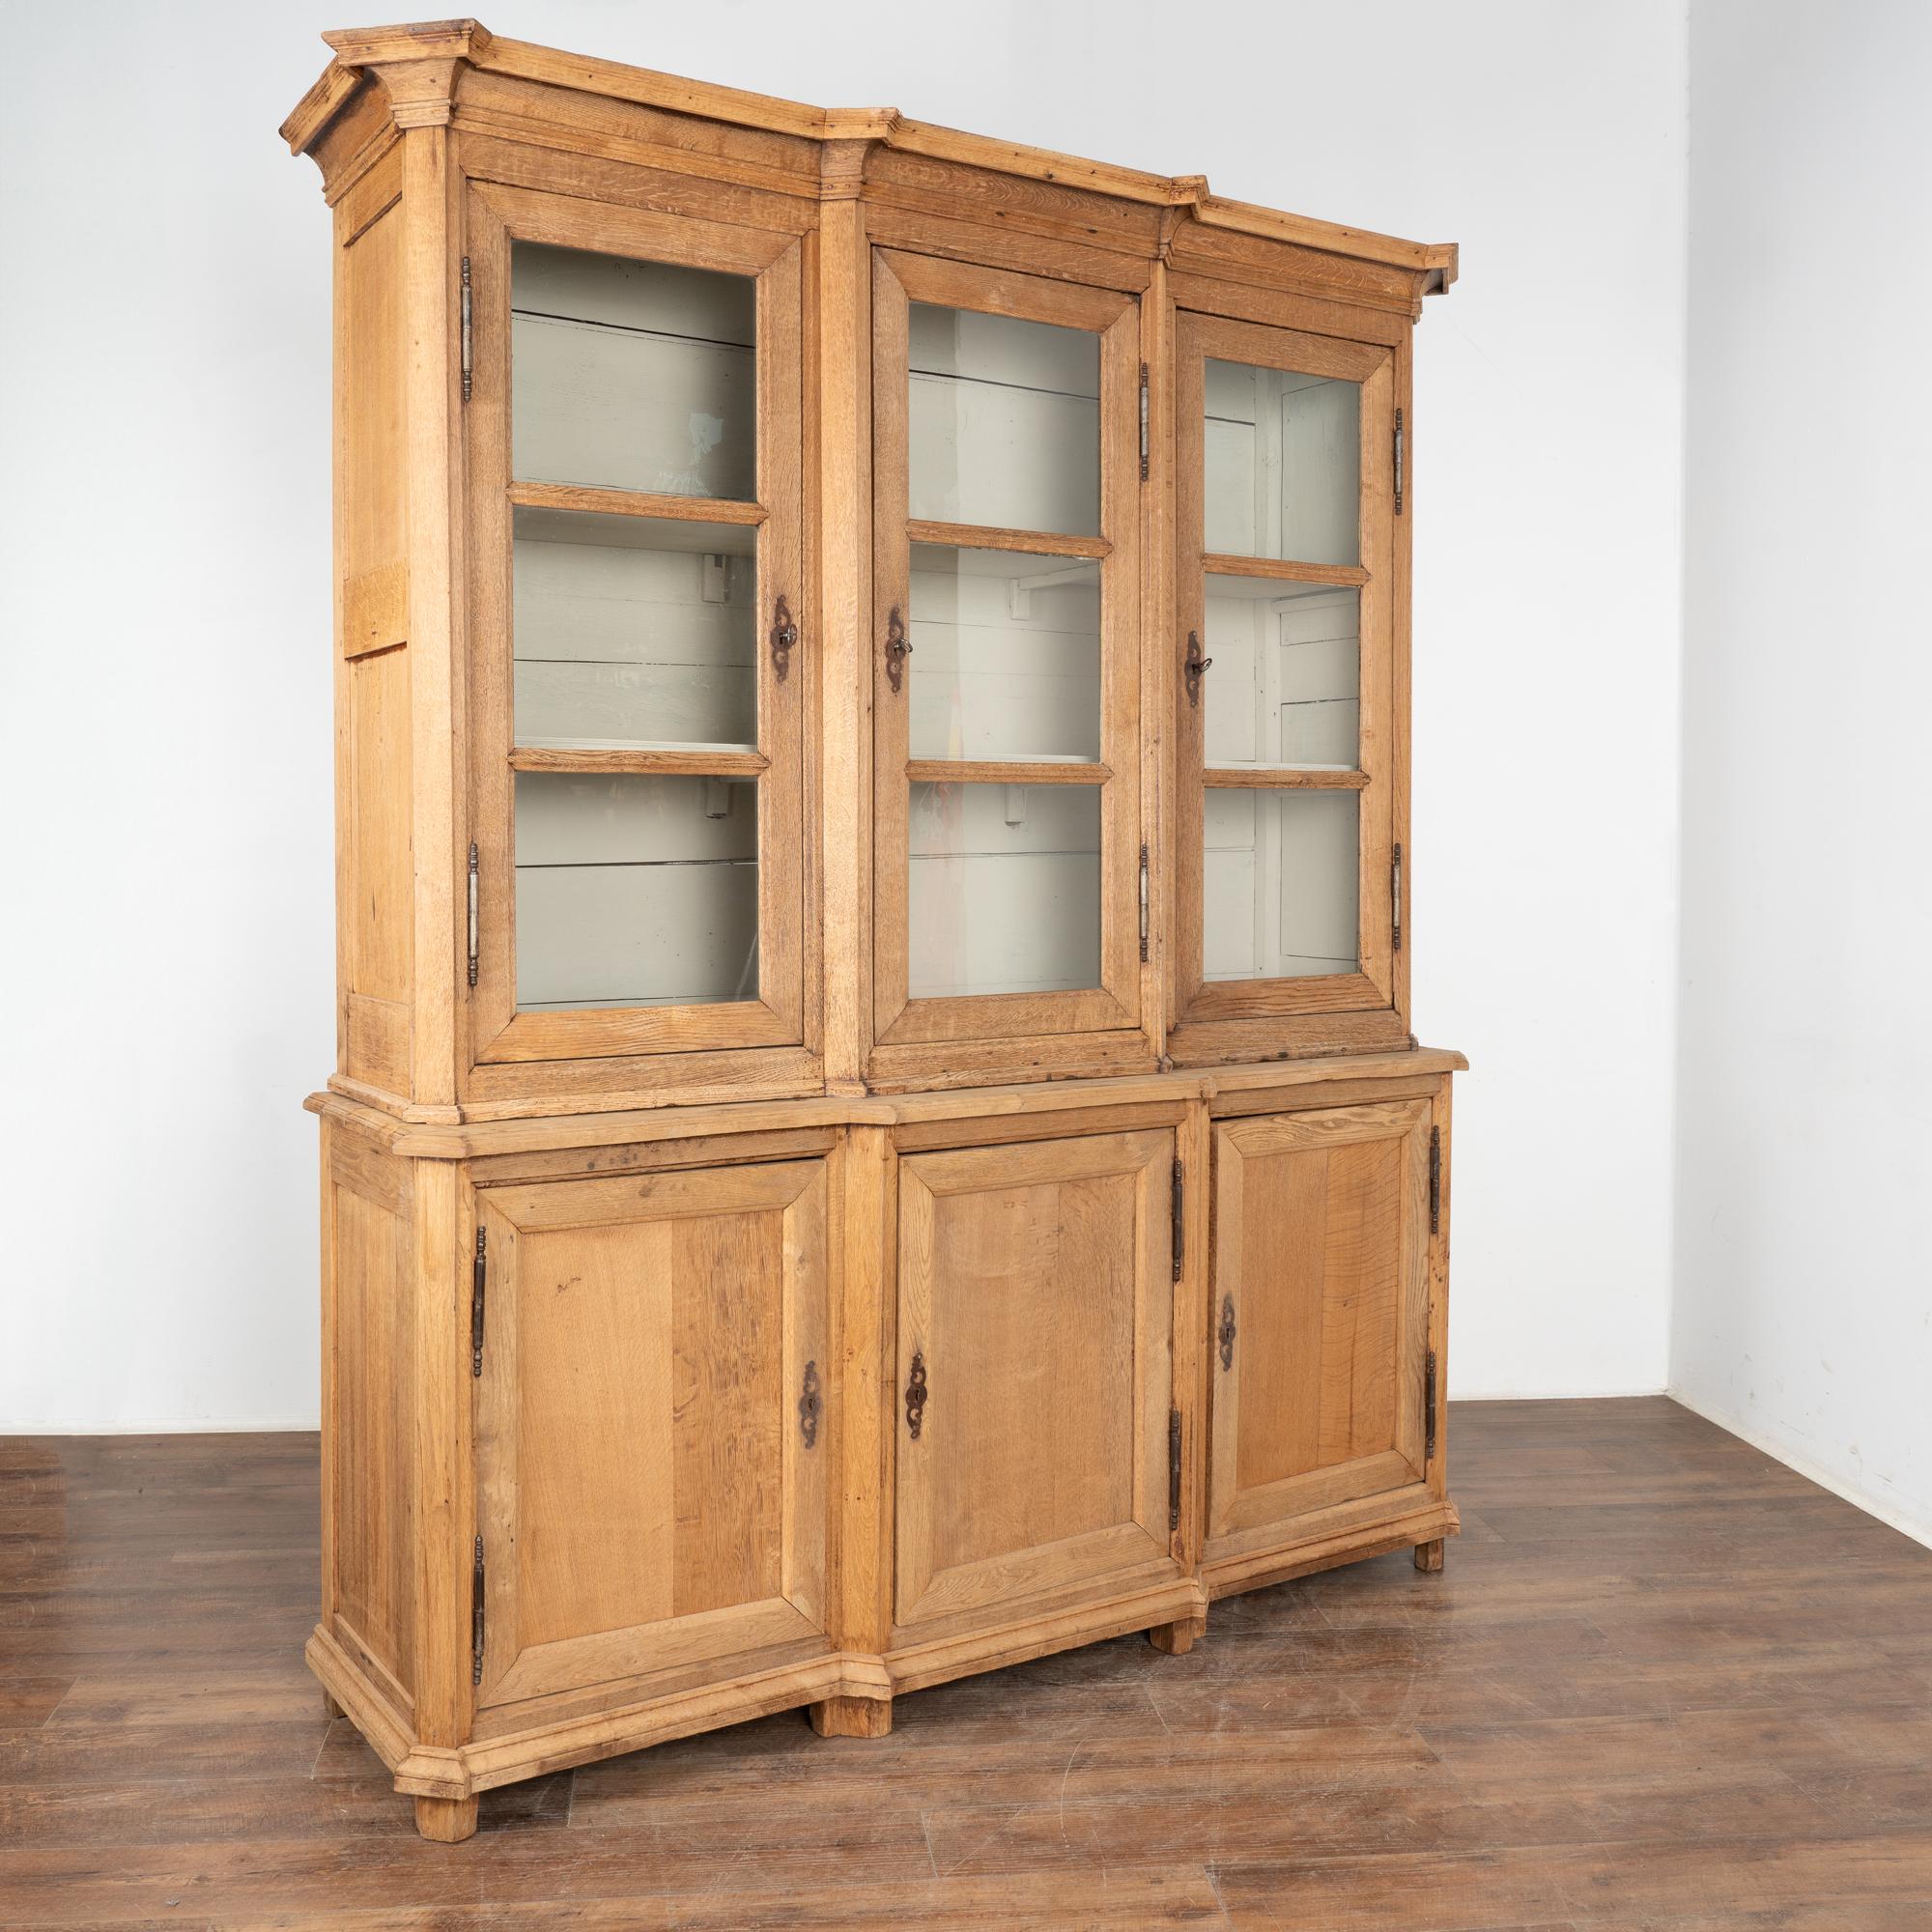 This large bleached oak bookcase is statuesque in size. At over 7' tall, the glass door panes add to its visual impact displaying any collection held within.
This cabinet is built in 2 sections, making it easier to install the heavy oak lower